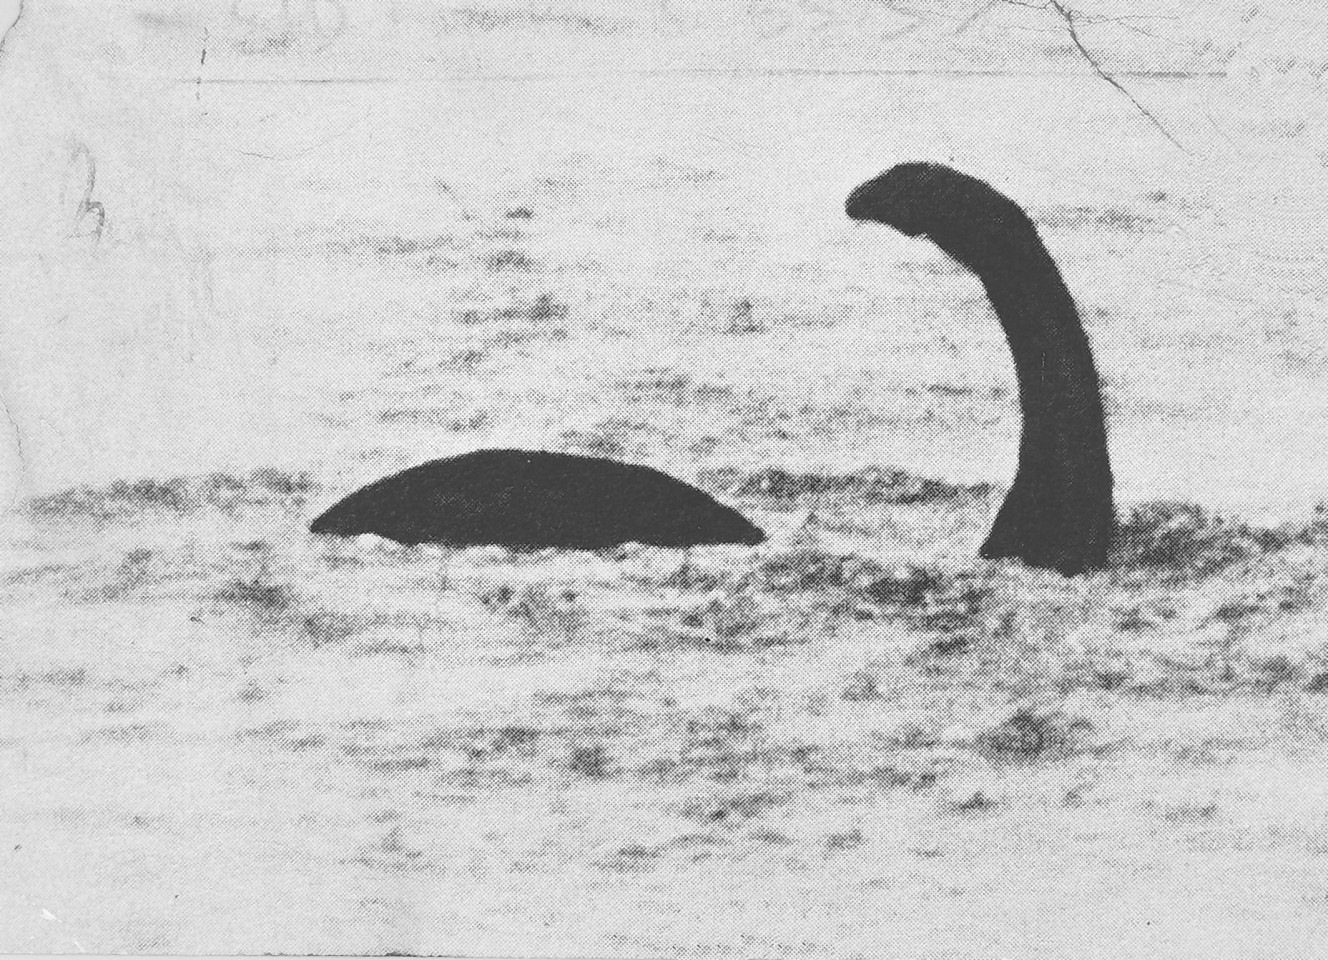 One of a famous faked pictures of Nessie